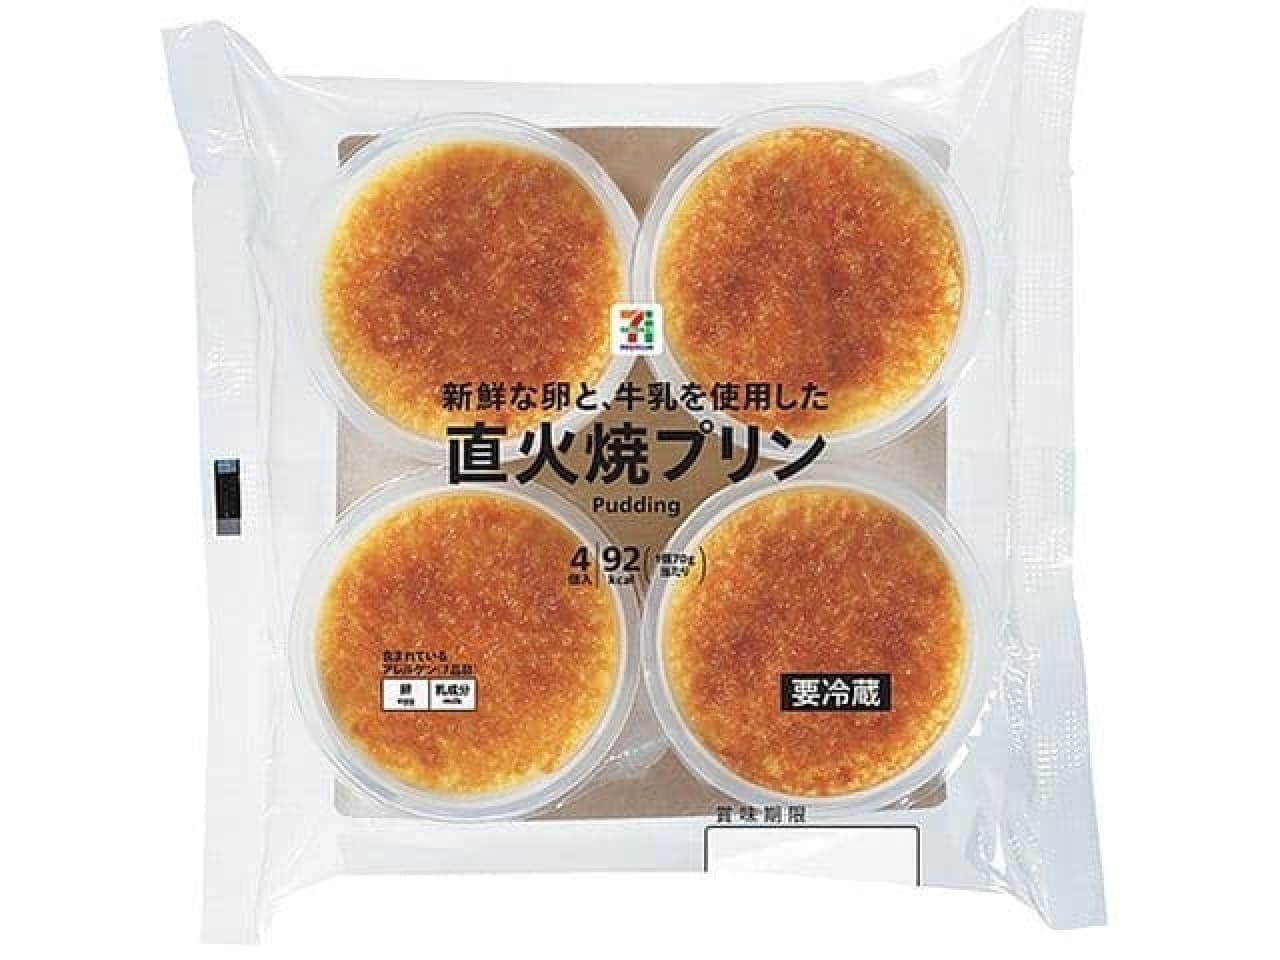 7Premium Open-flame Baked Pudding 70g x 4